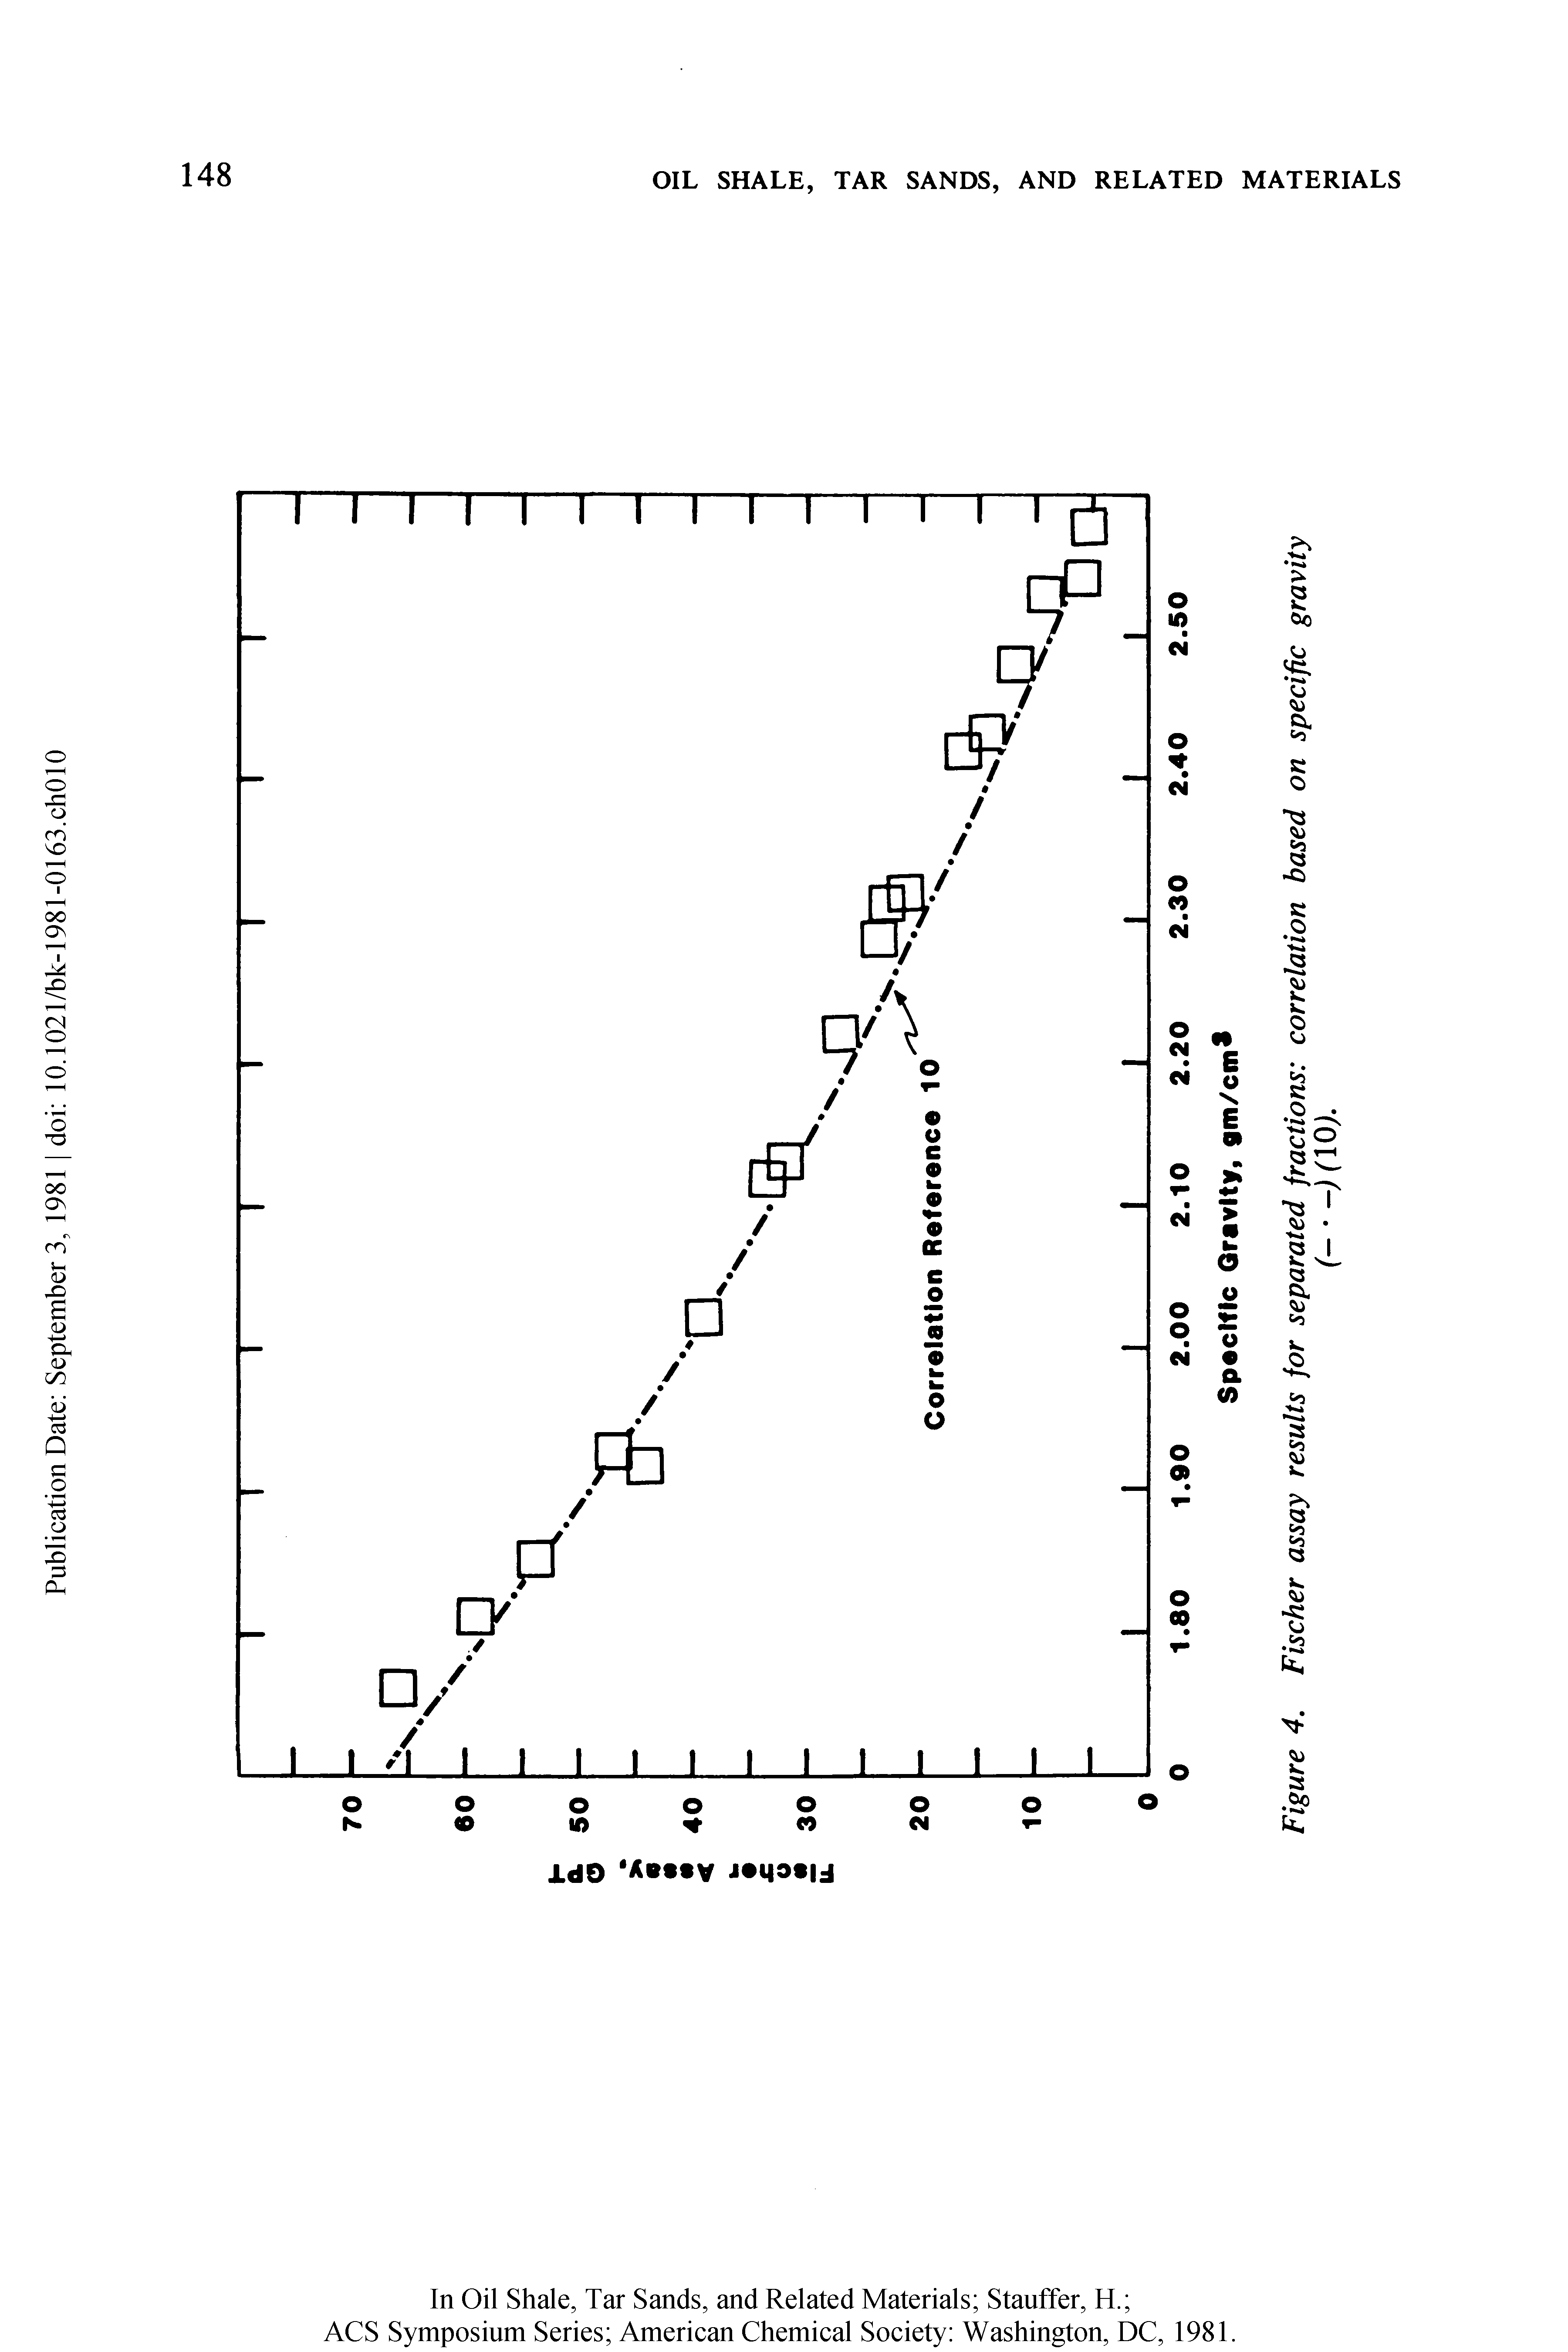 Figure 4. Fischer assay results for separated fractions correlation based on specific gravity...